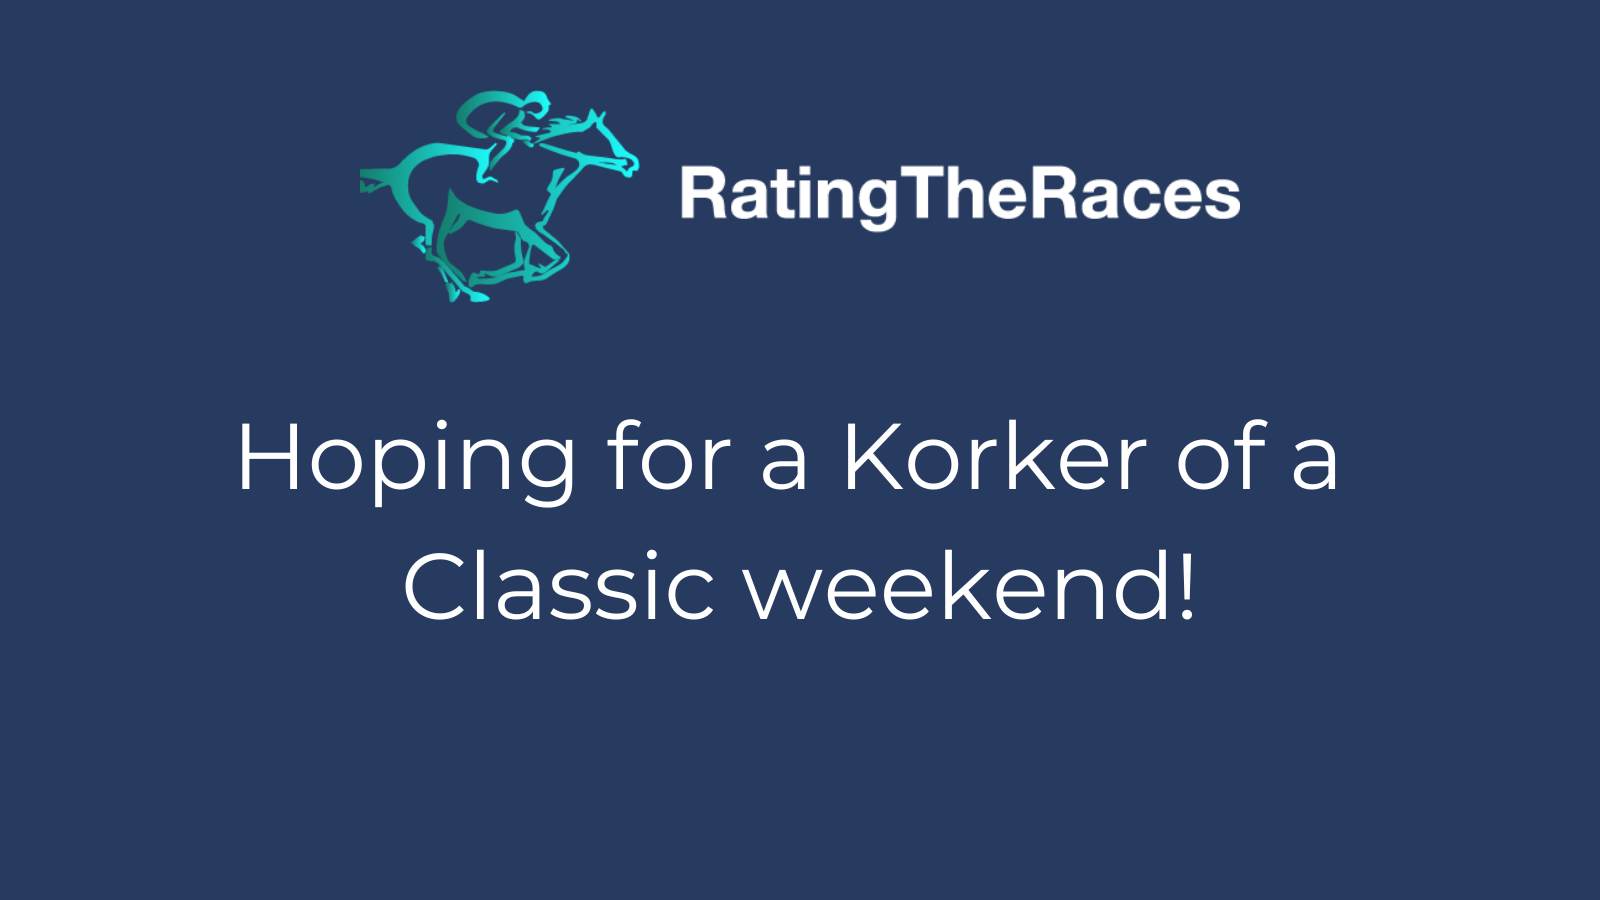 Hoping for a Korker of a weekend!